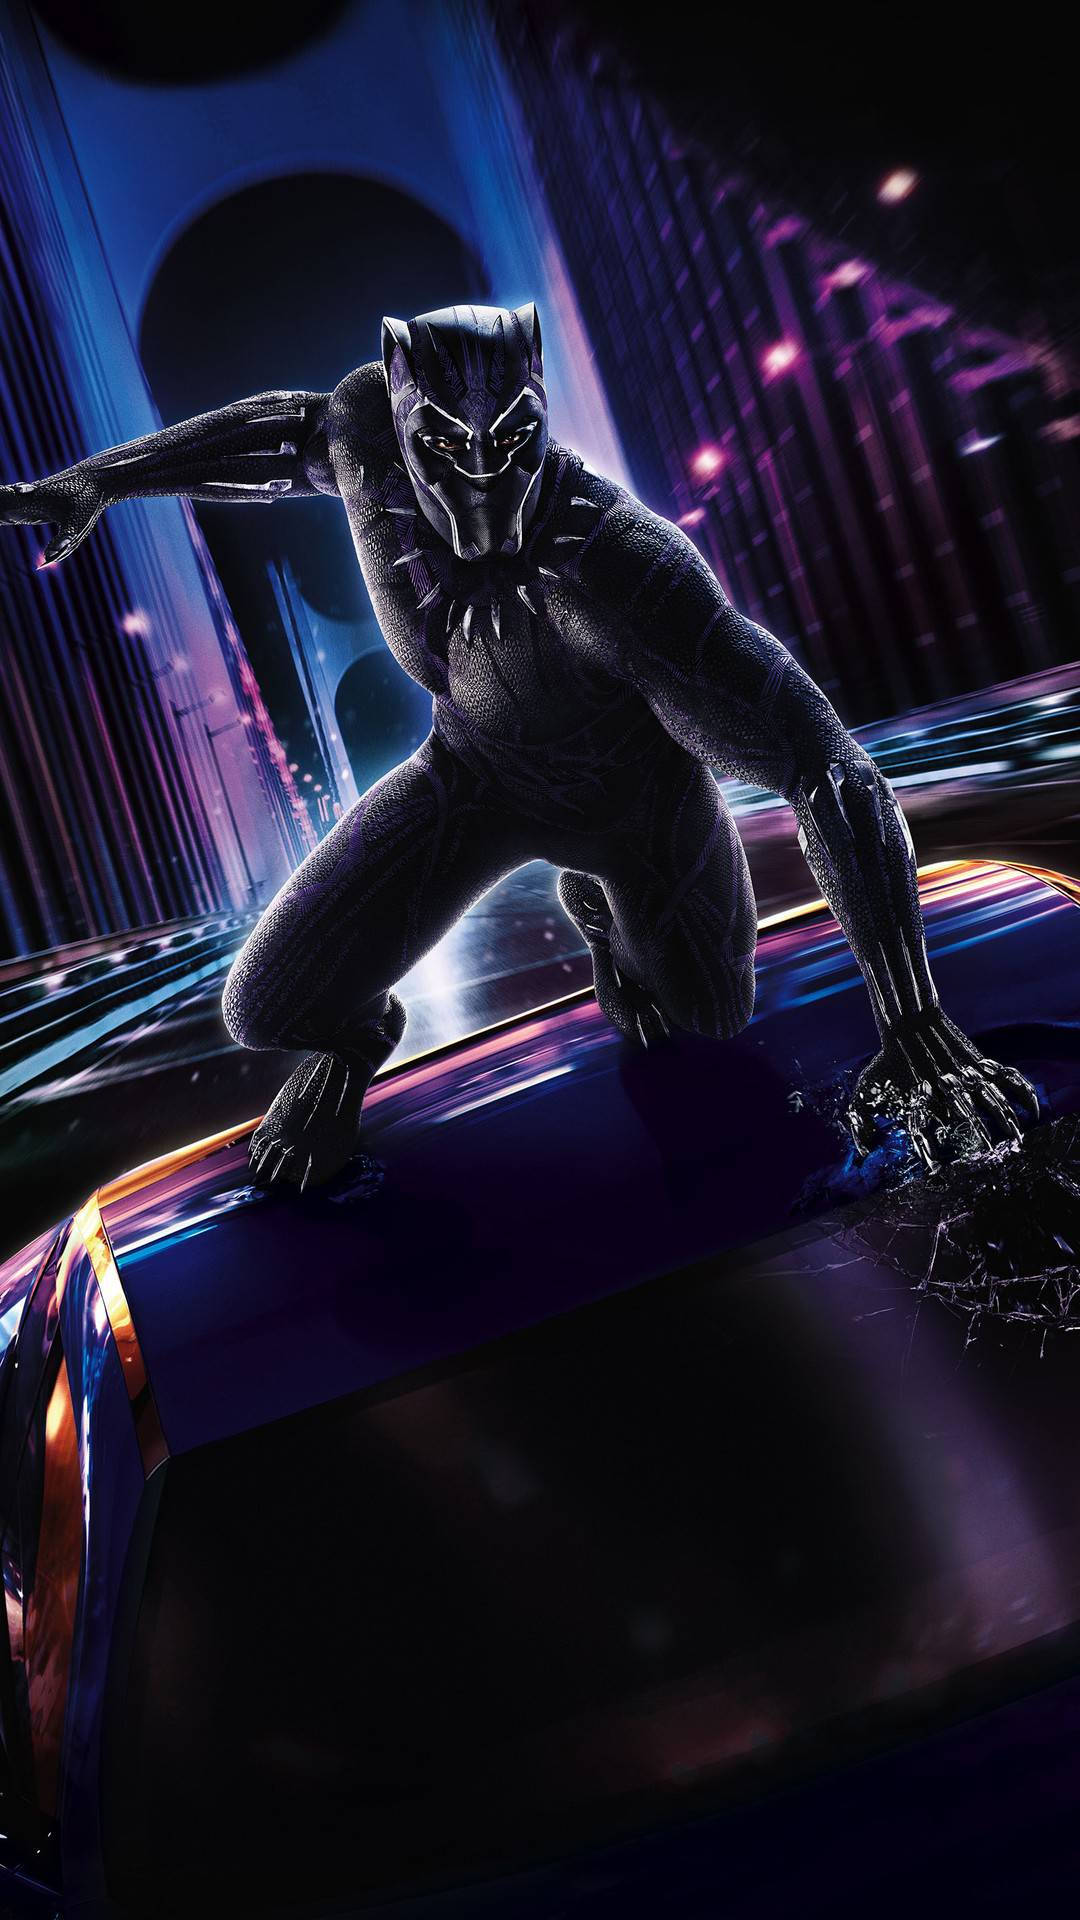 Moving Car With Black Panther Android